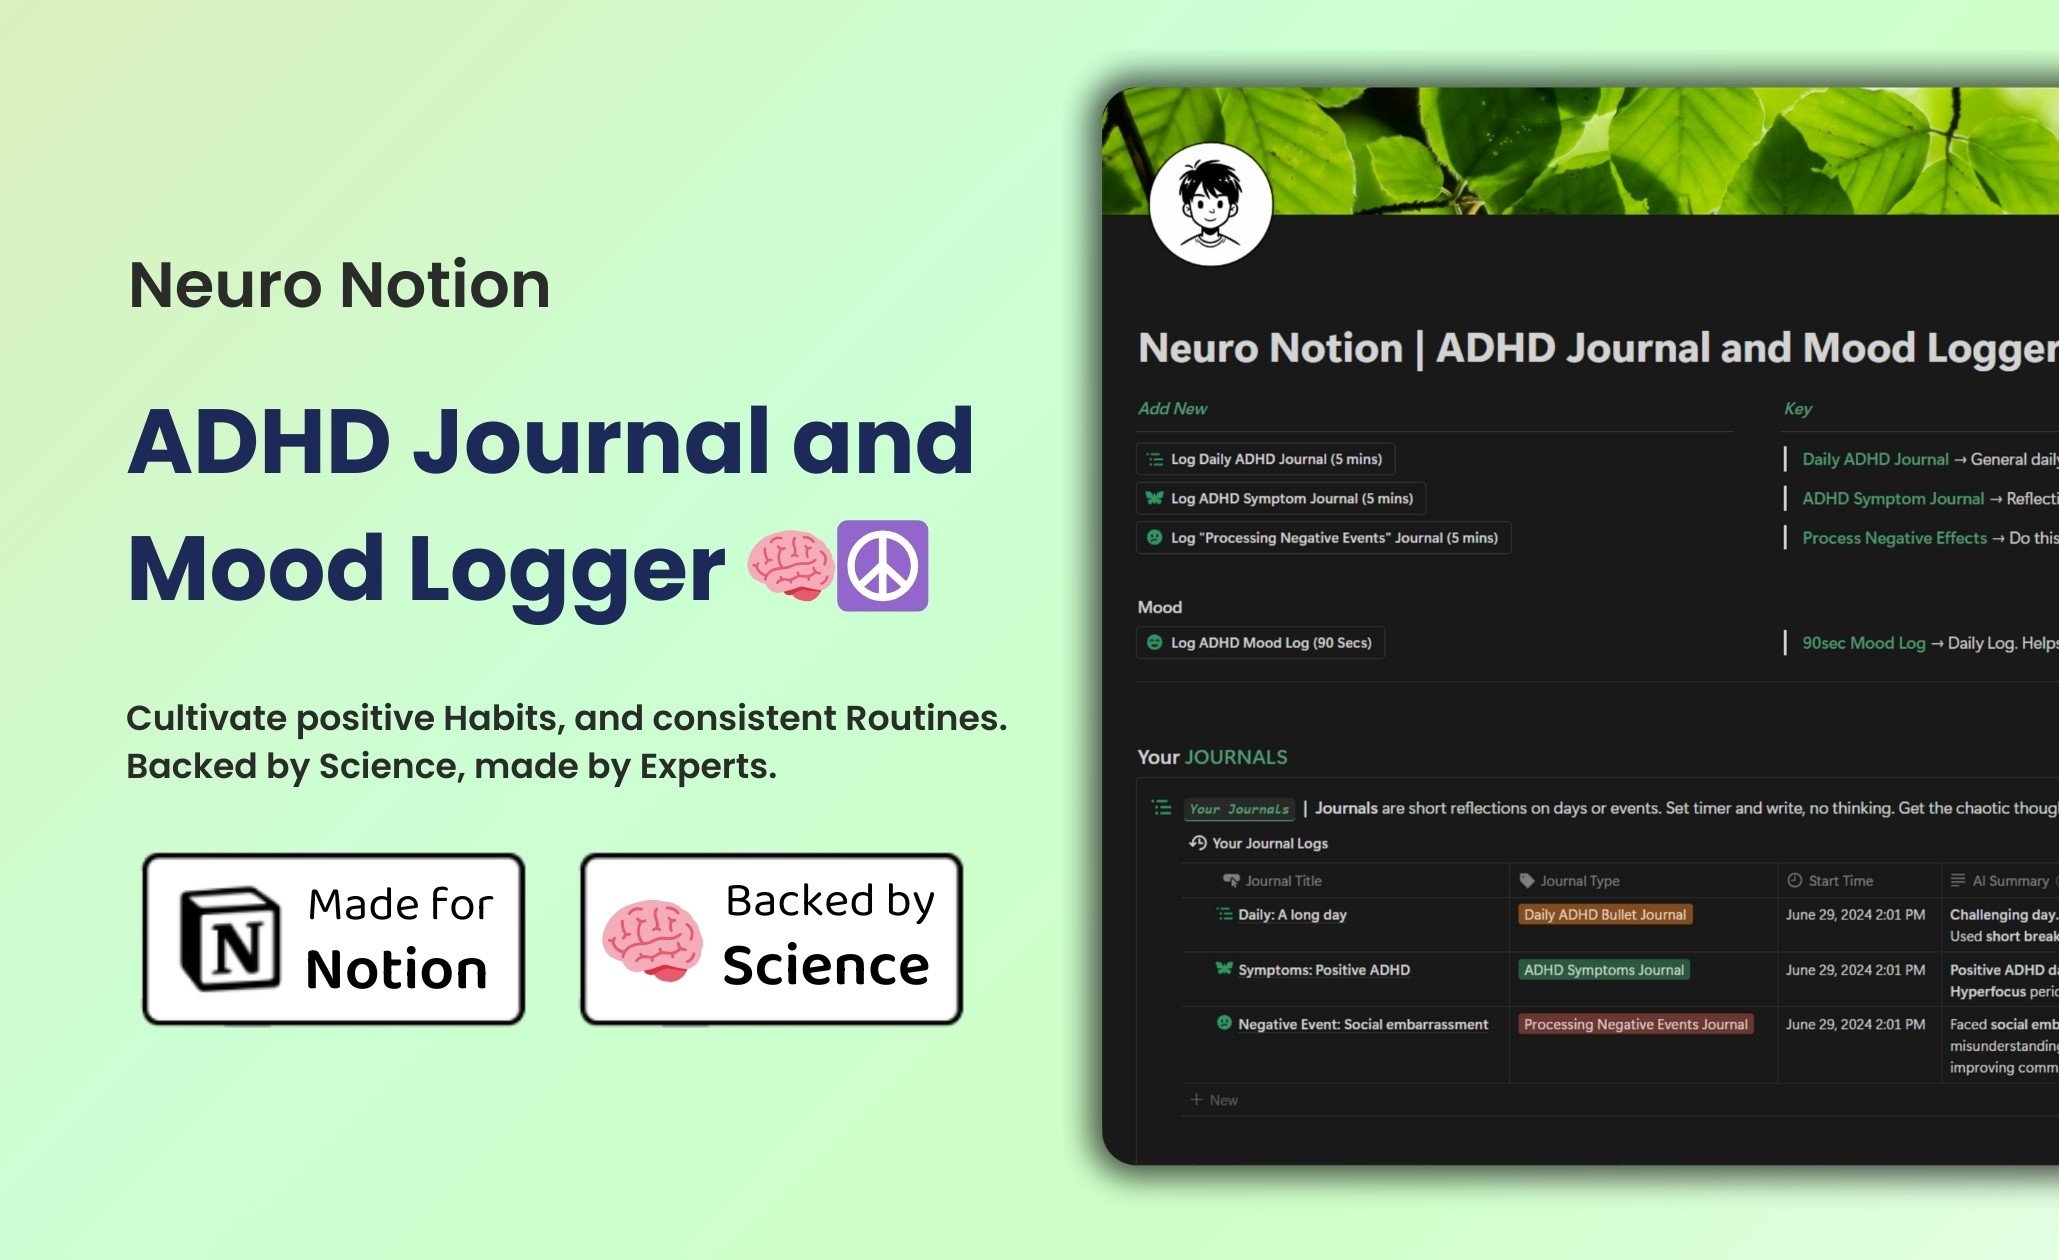 Neuro Notion's ADHD Journal and Mood Logger is the first Mental Health Tracker/Logger built around and scientifically designed specifically for the ADHD brain 🧠